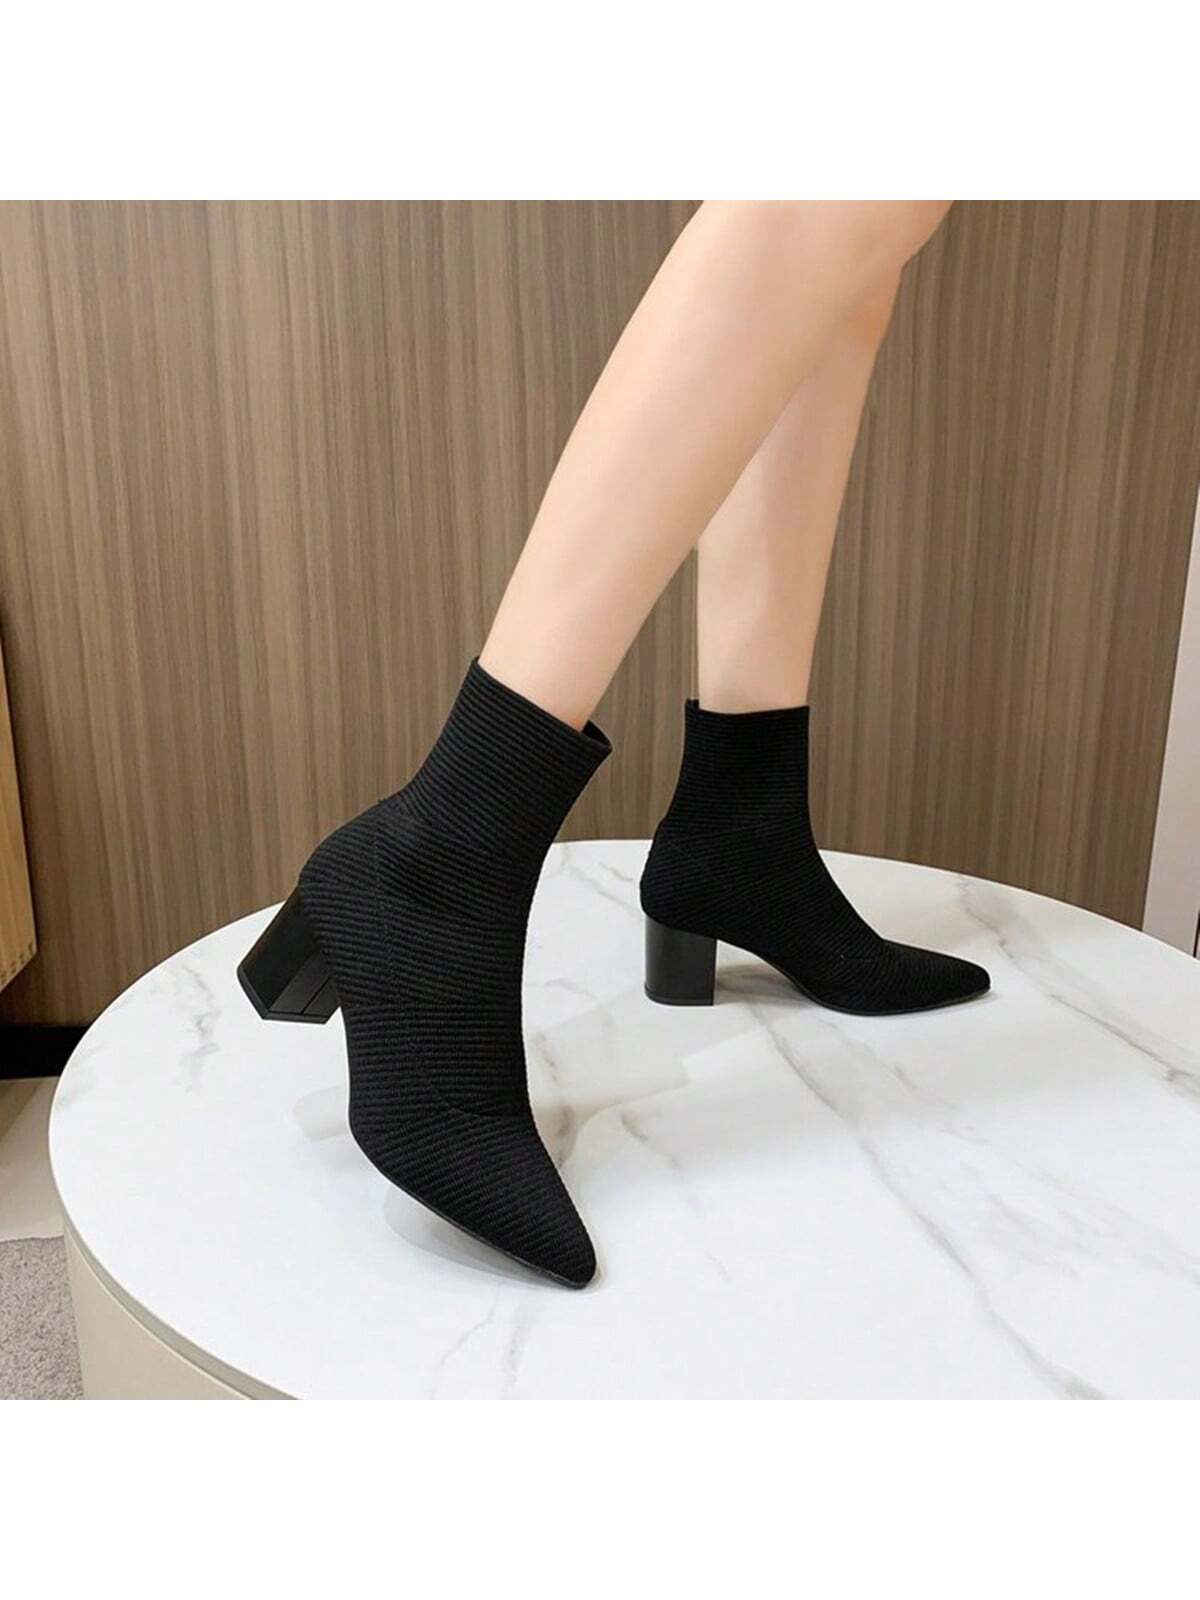 Fashion Pointed Toe Women's Boots With Chunky Heels-Black-2